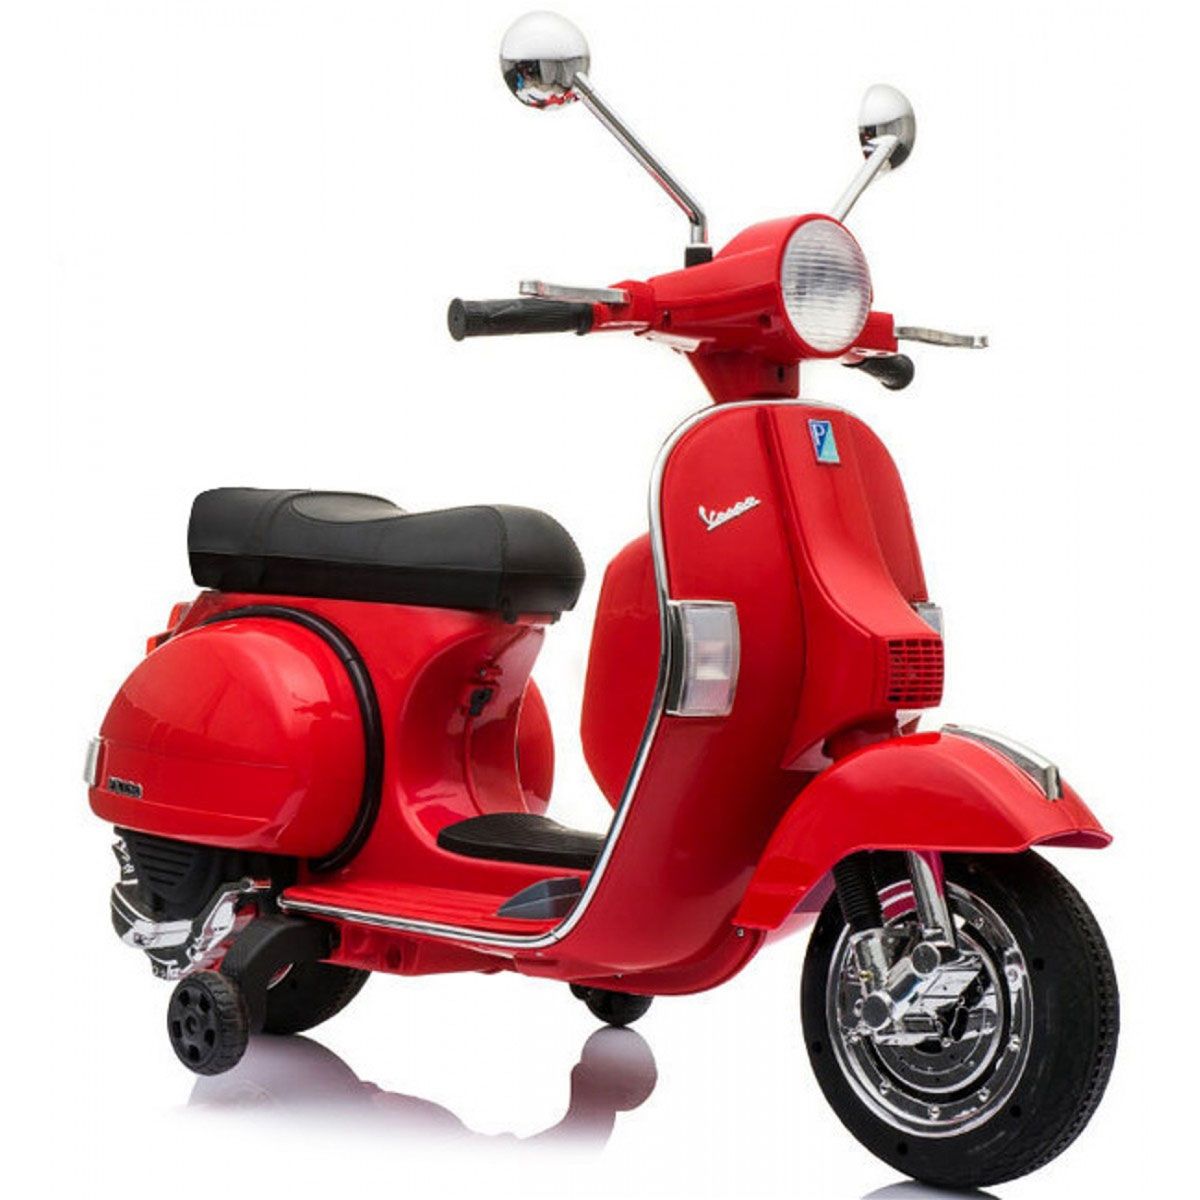 Scooter per bambini SIP 14202340 